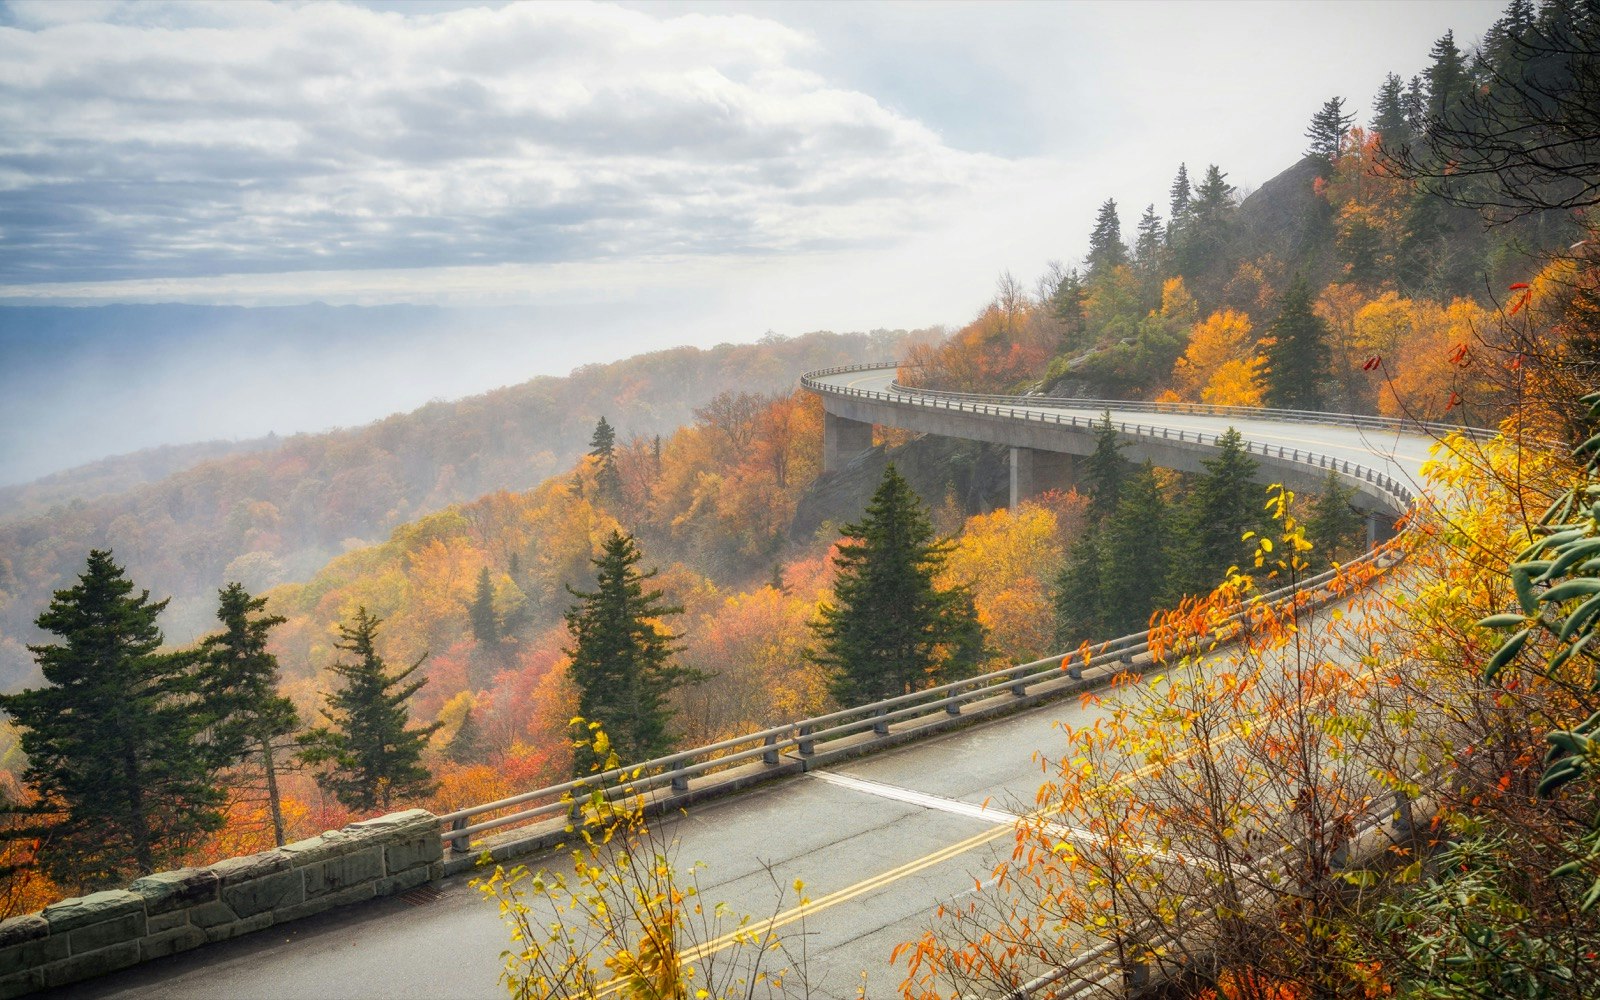 A viaduct along the Blue Ridge Parkway cuts through a forest turning various shades of yellow and orange